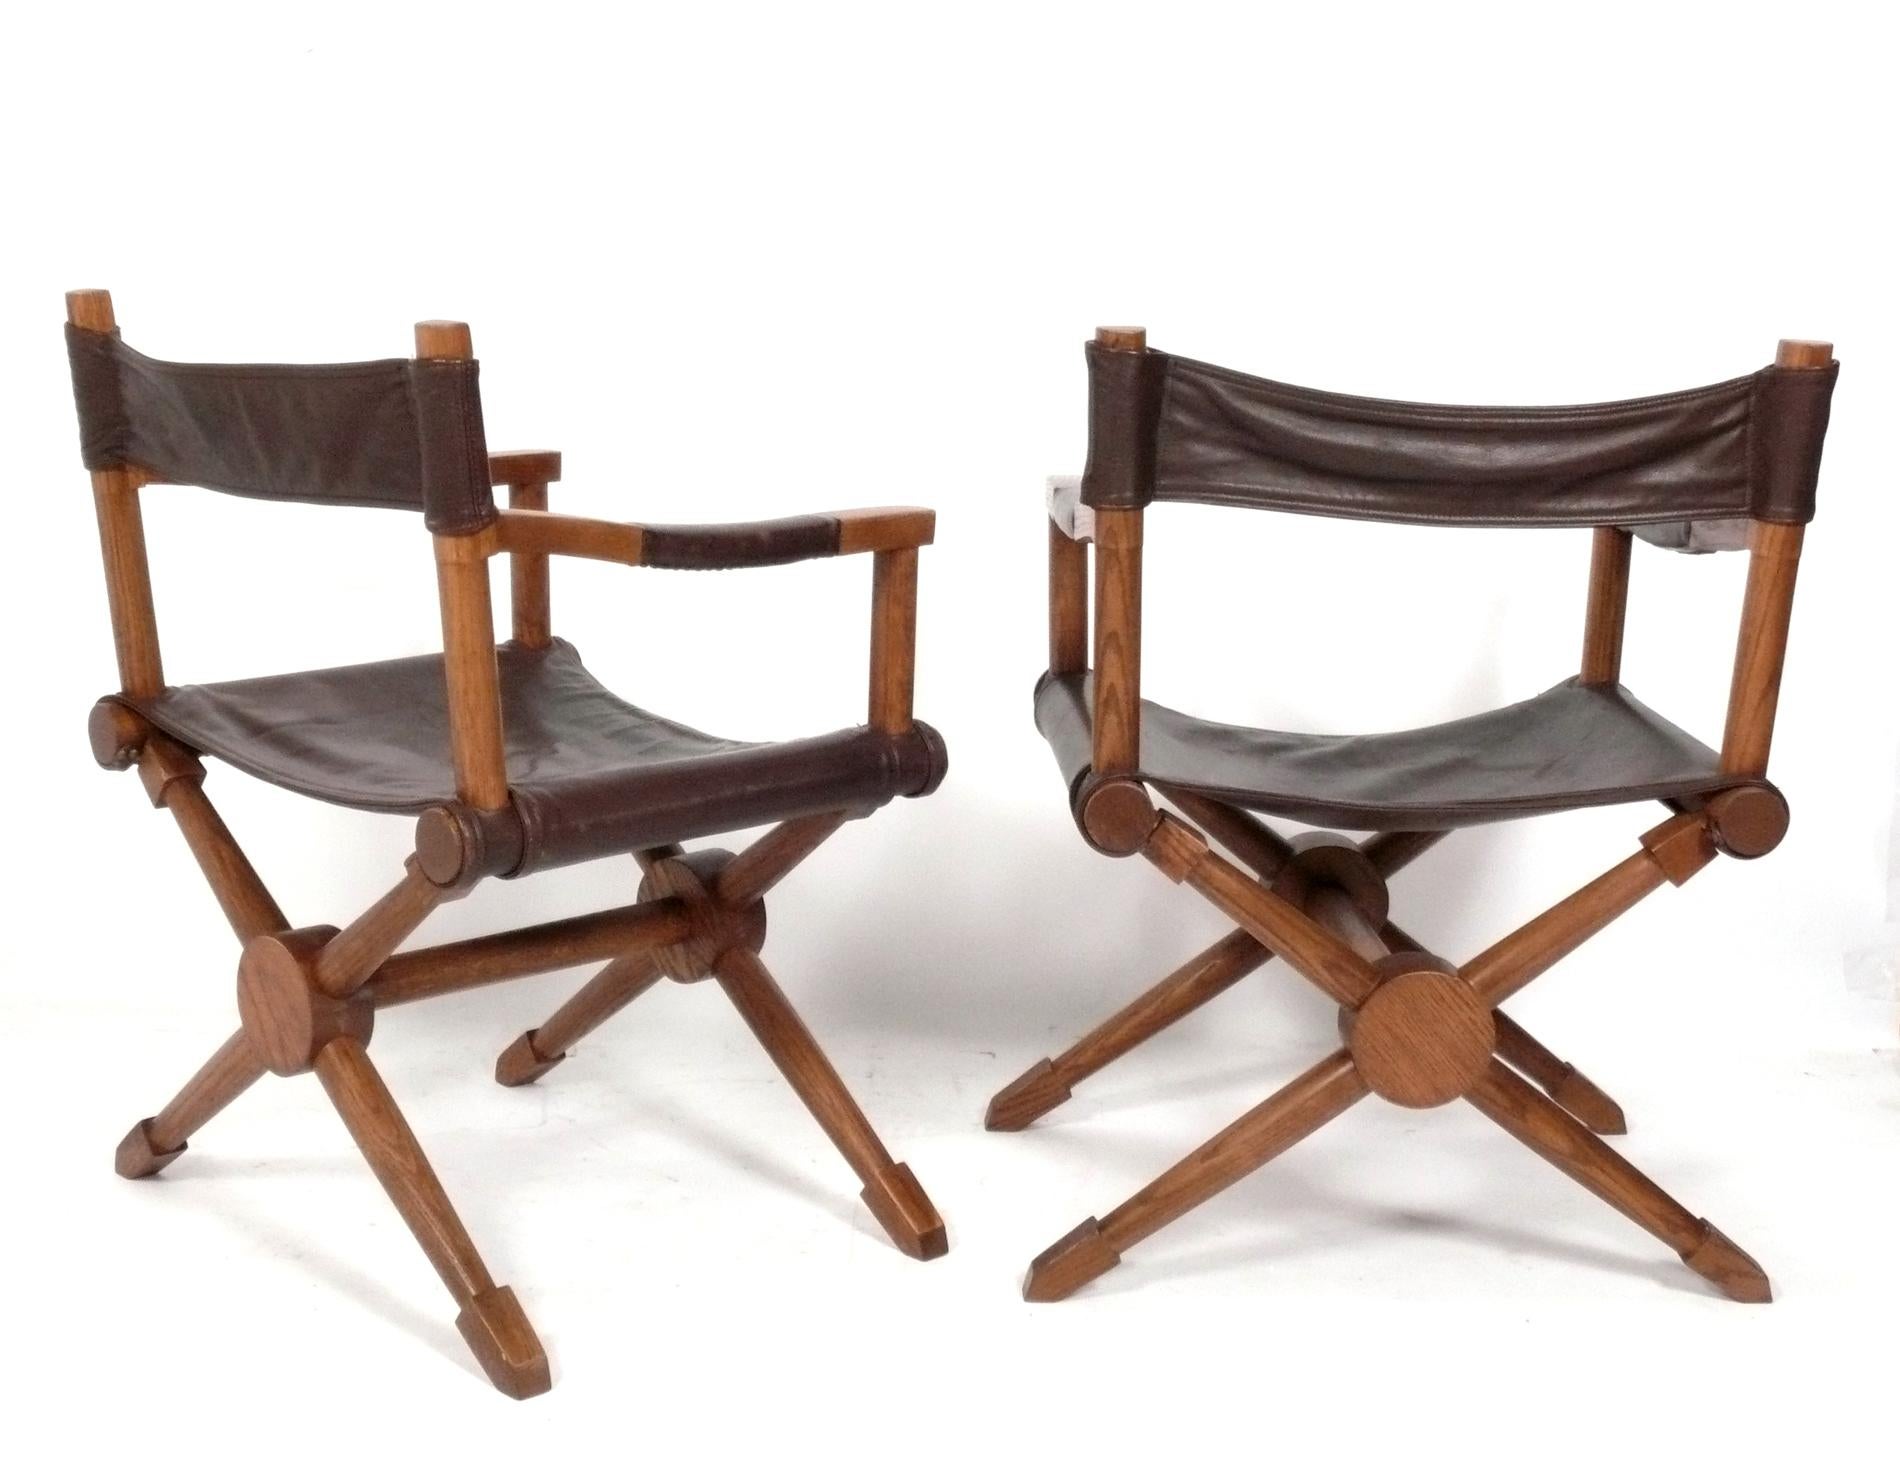 Art Deco Pair of Rodo Chairs by Paul Rodocanachi for Jean Michel Frank